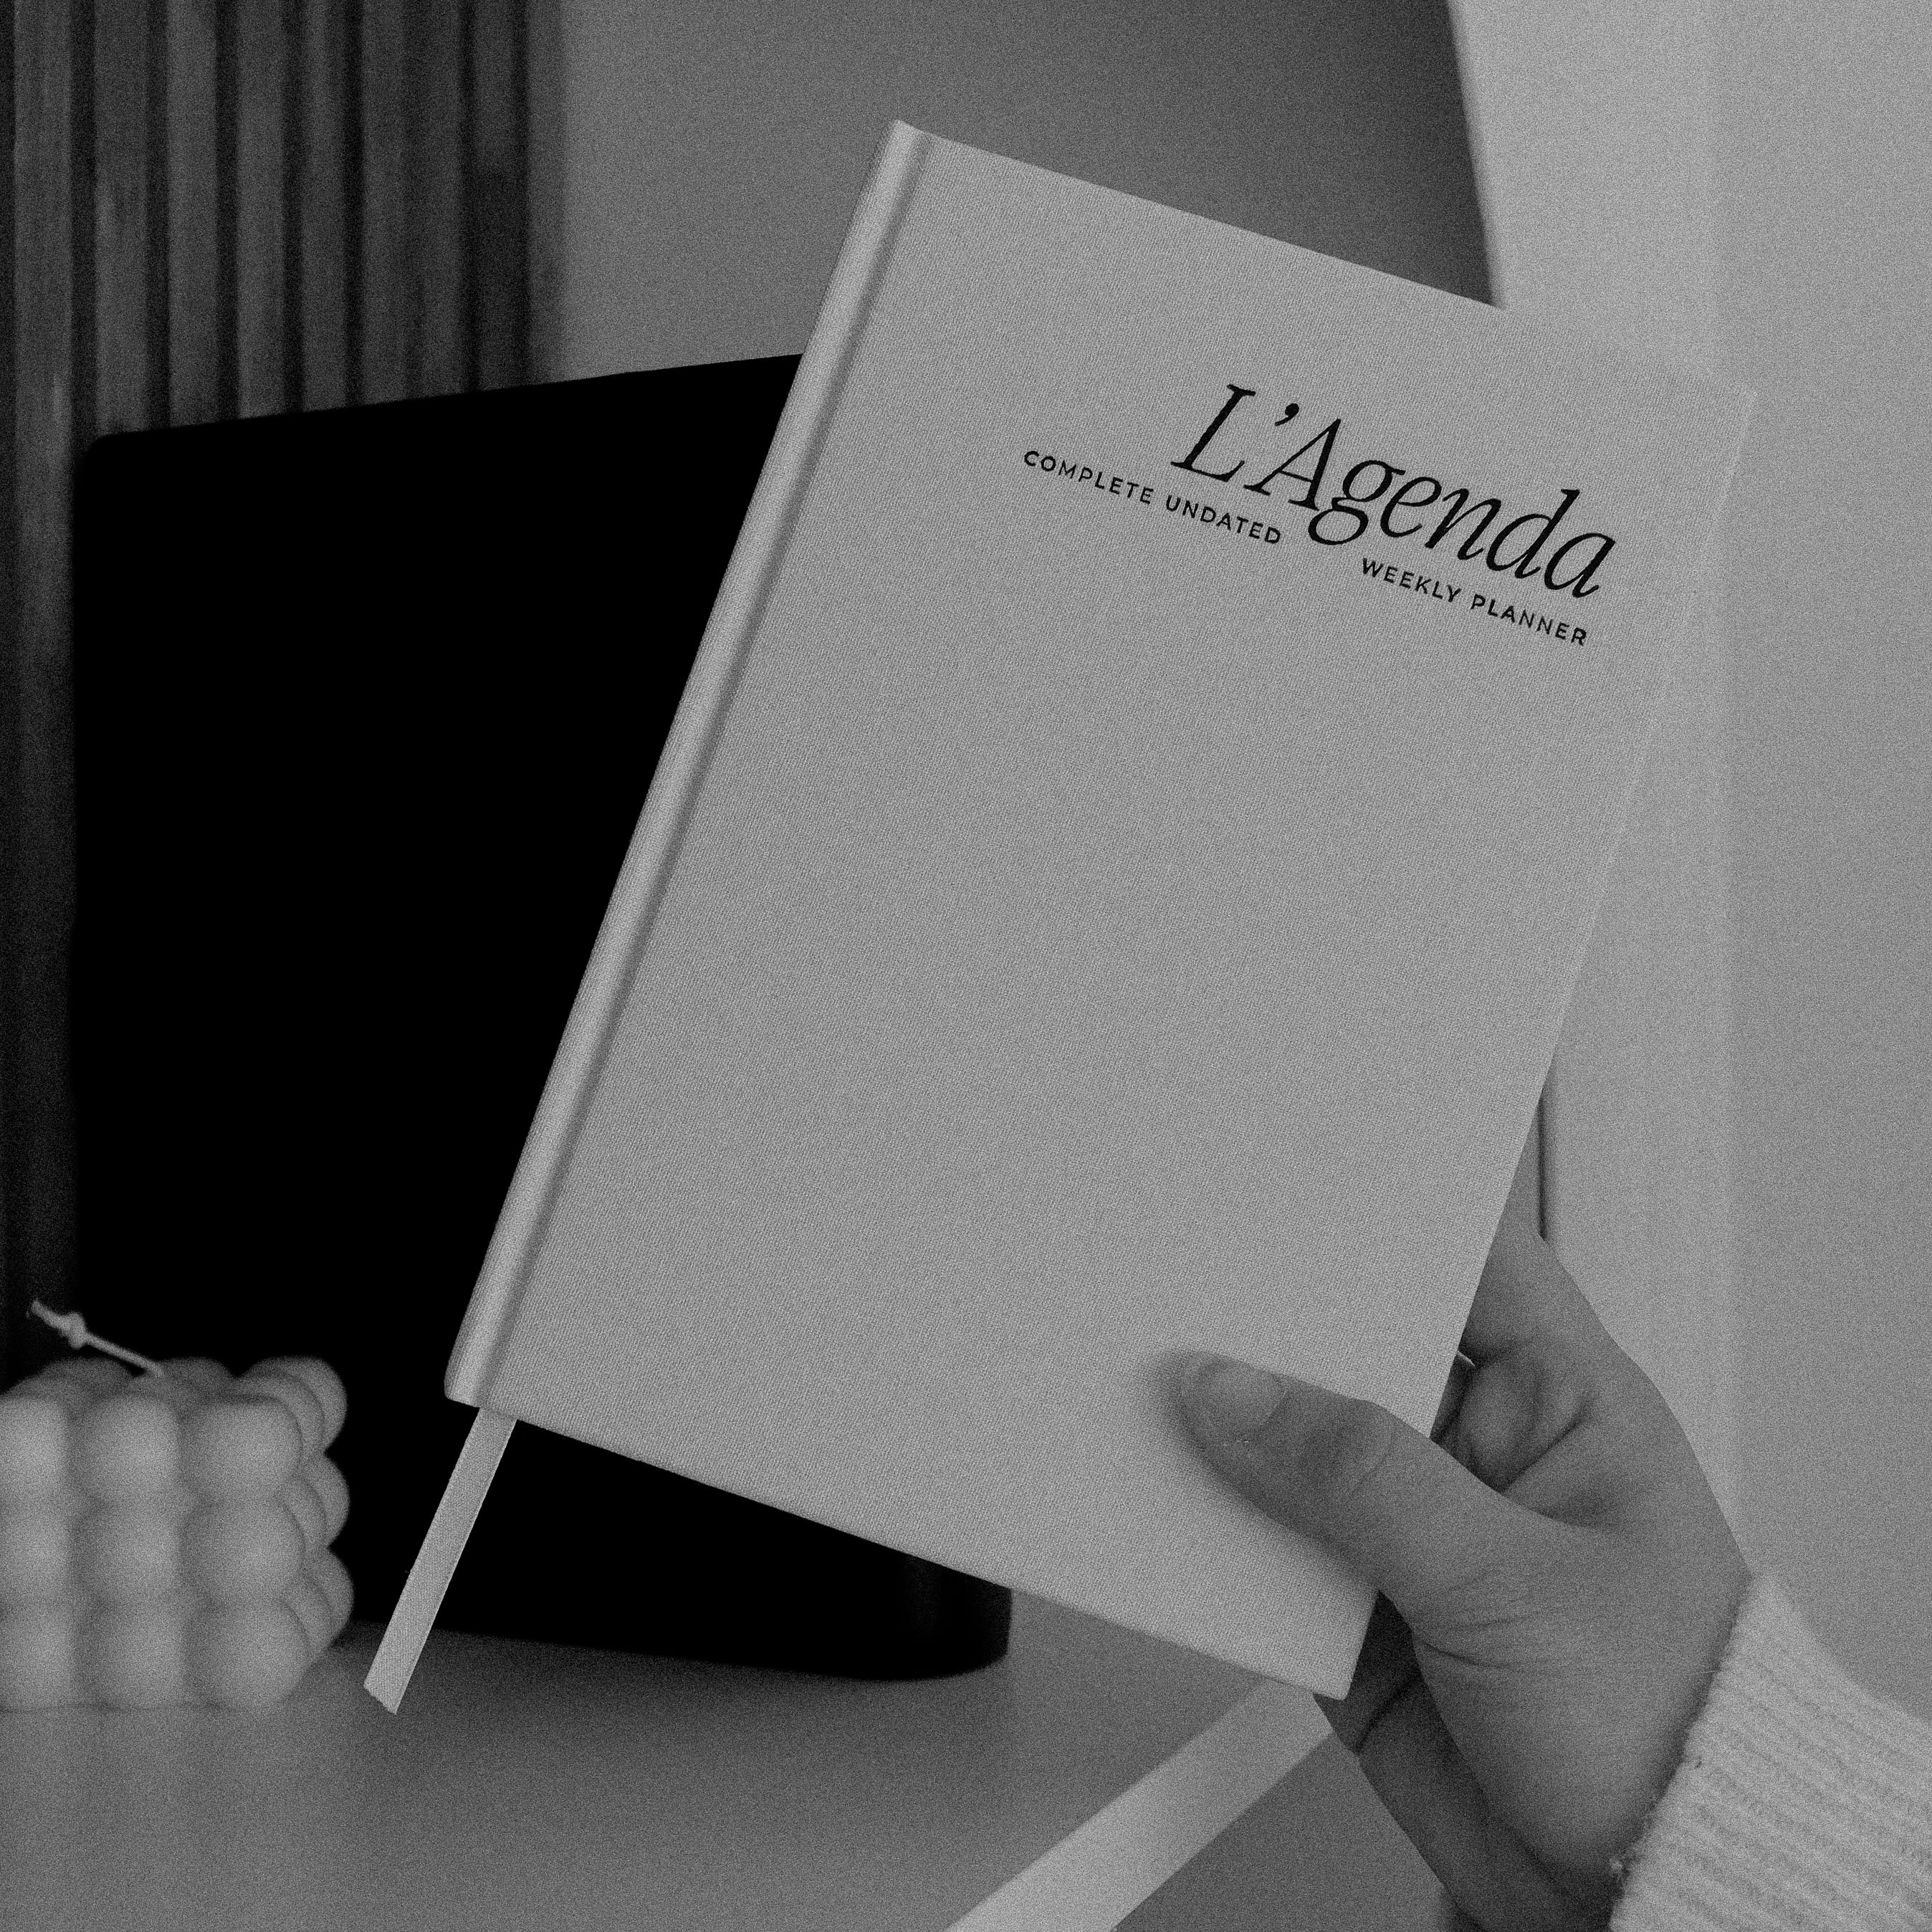 L'Agenda : The Complete Undated Weekly Planner – Rosie Papeterie